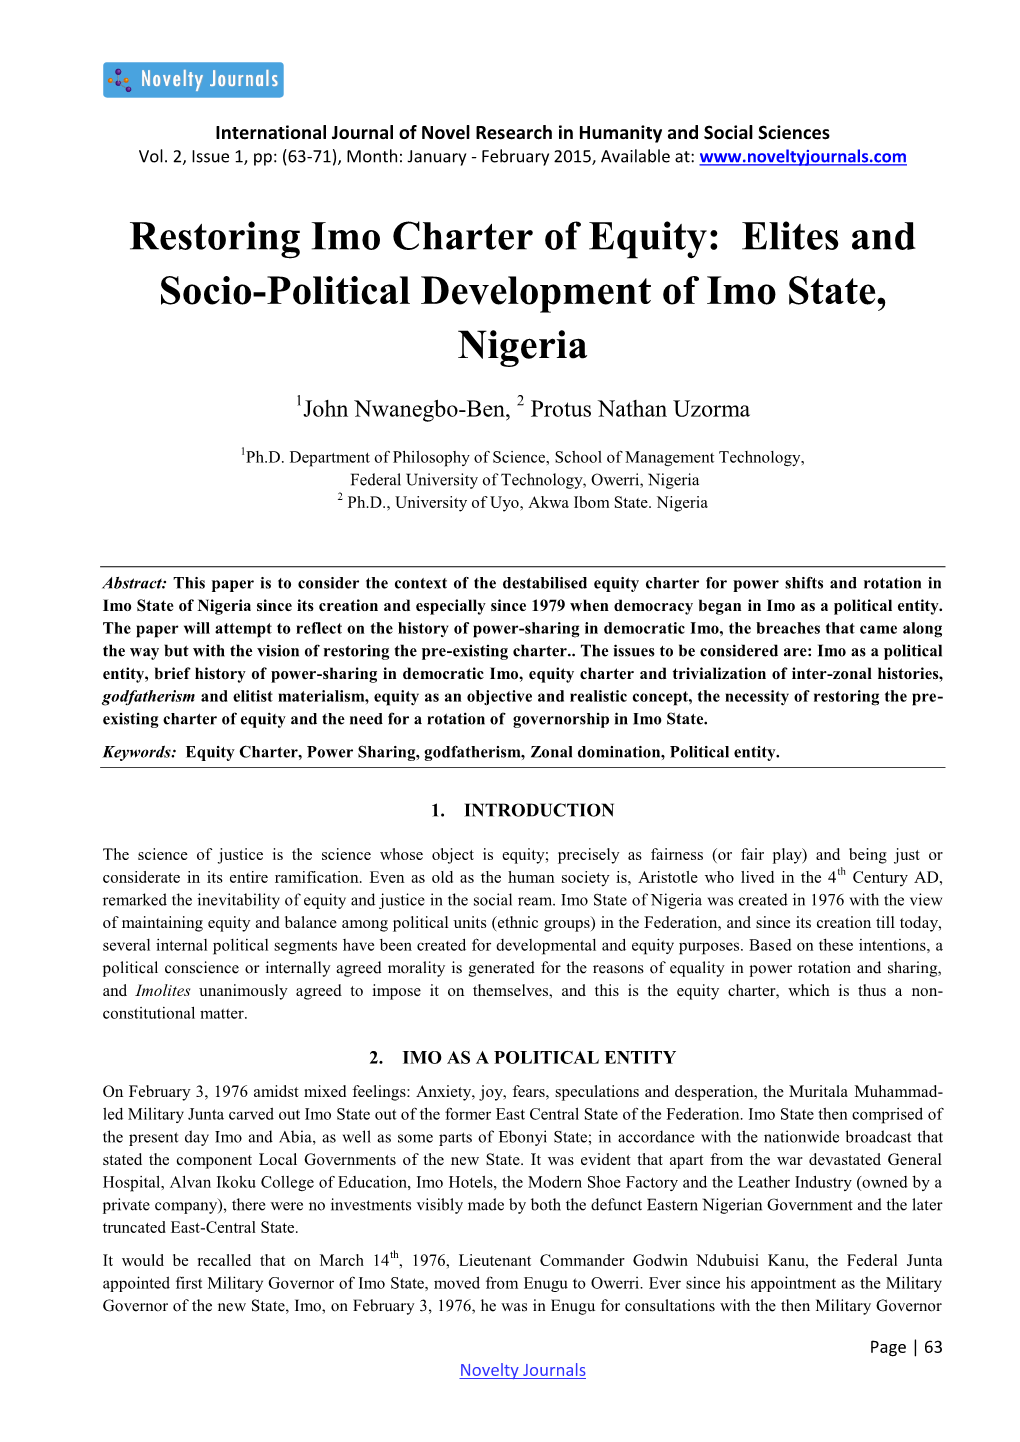 Restoring Imo Charter of Equity: Elites and Socio-Political Development of Imo State, Nigeria